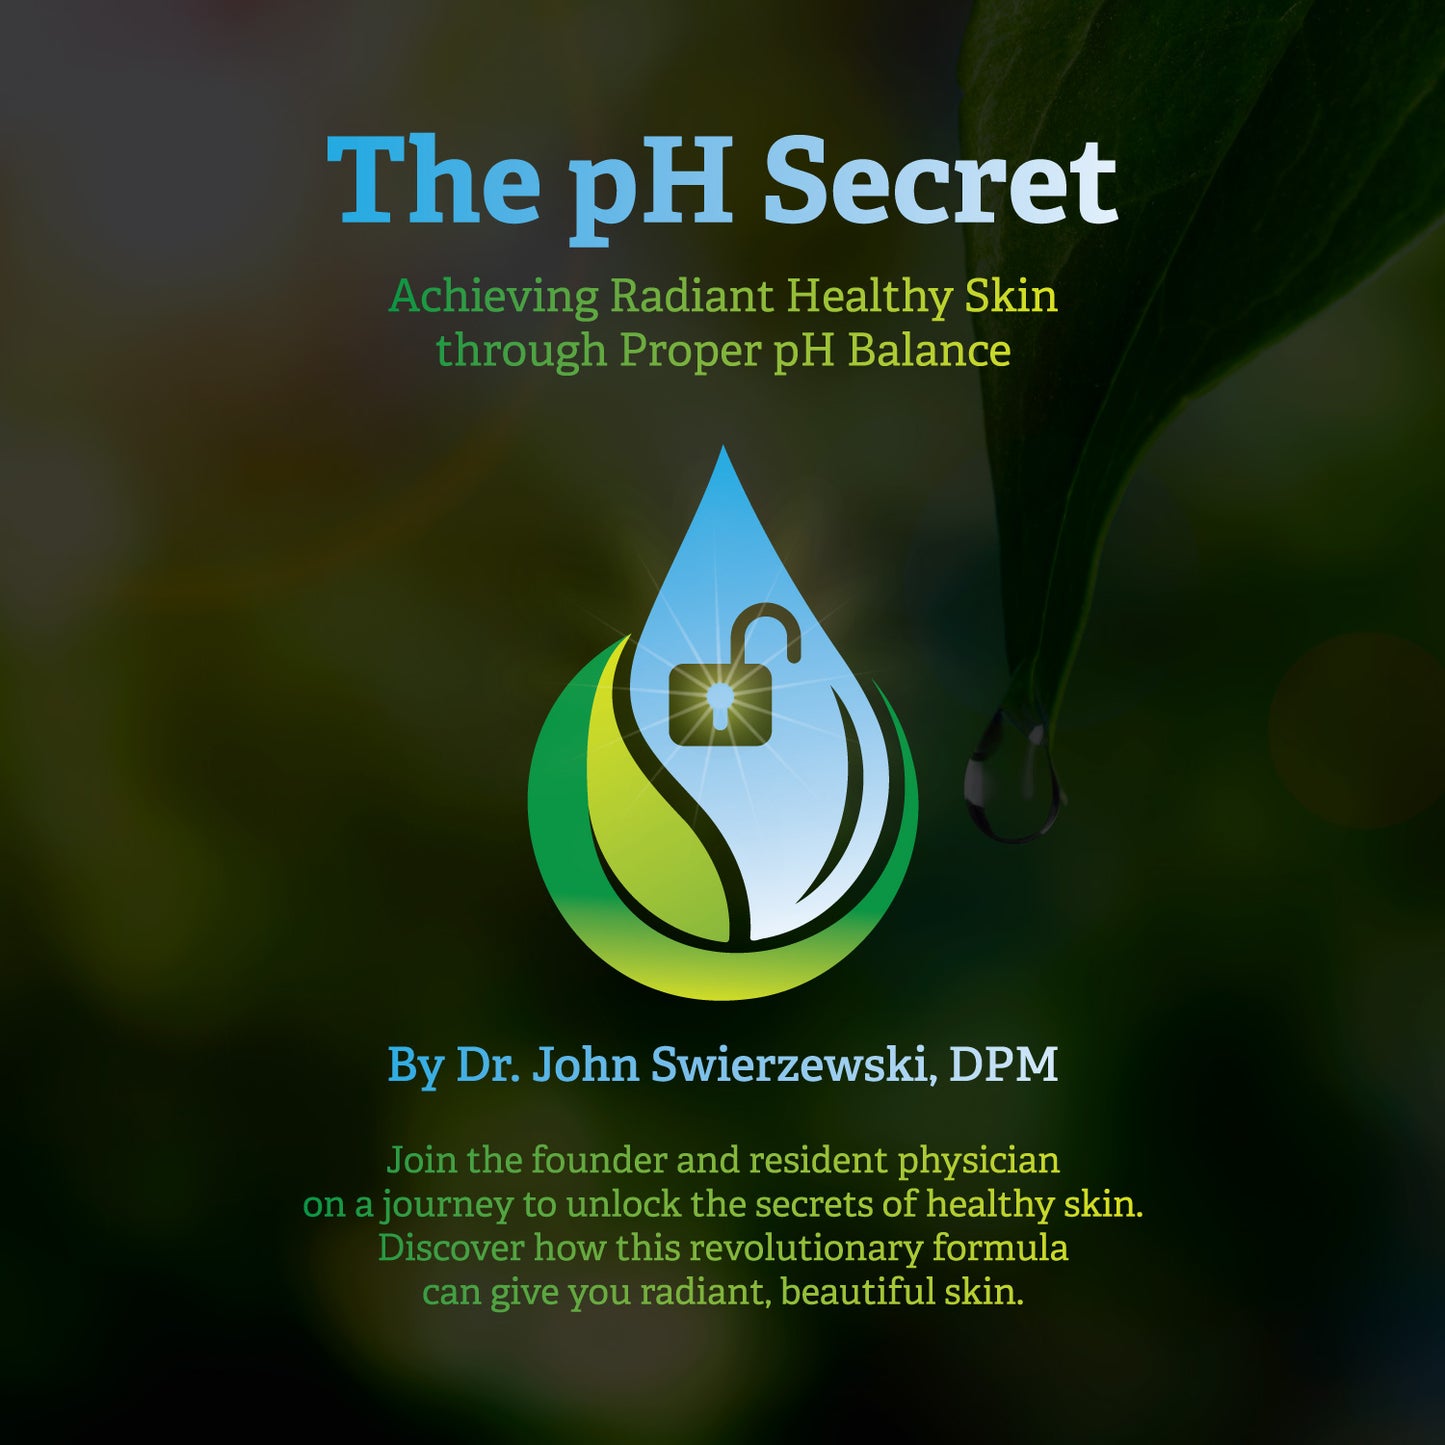 The pH Secret shares info about how to achieve the best skin and important knowledge on pH Balance.